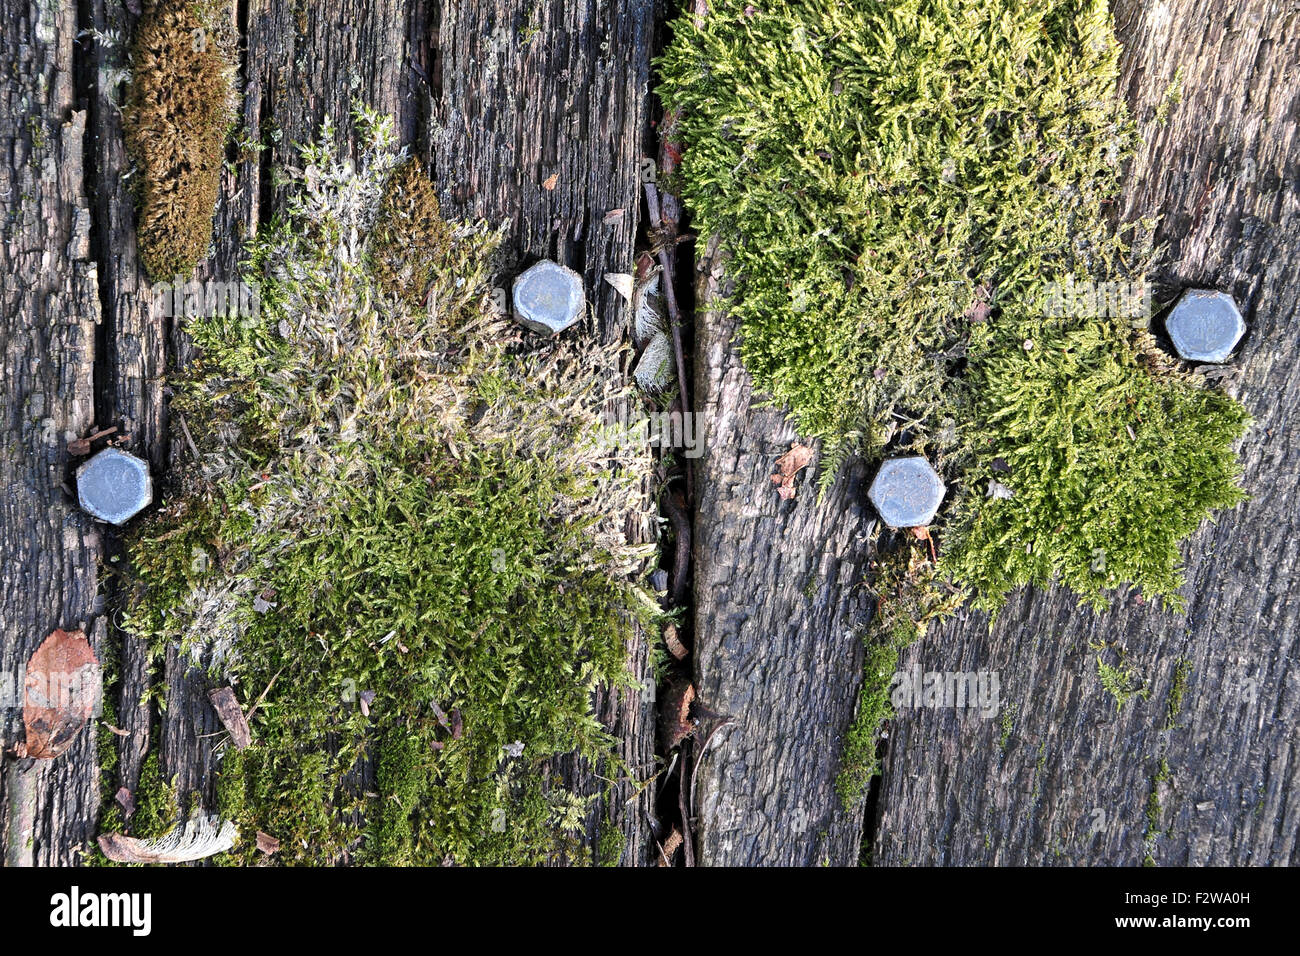 09.05.2015, Sandkrug, Lower Saxony, Germany - Moss on an old wooden plank. 0HD150509D042CAROEX.JPG - NOT for SALE in G E R M A Stock Photo